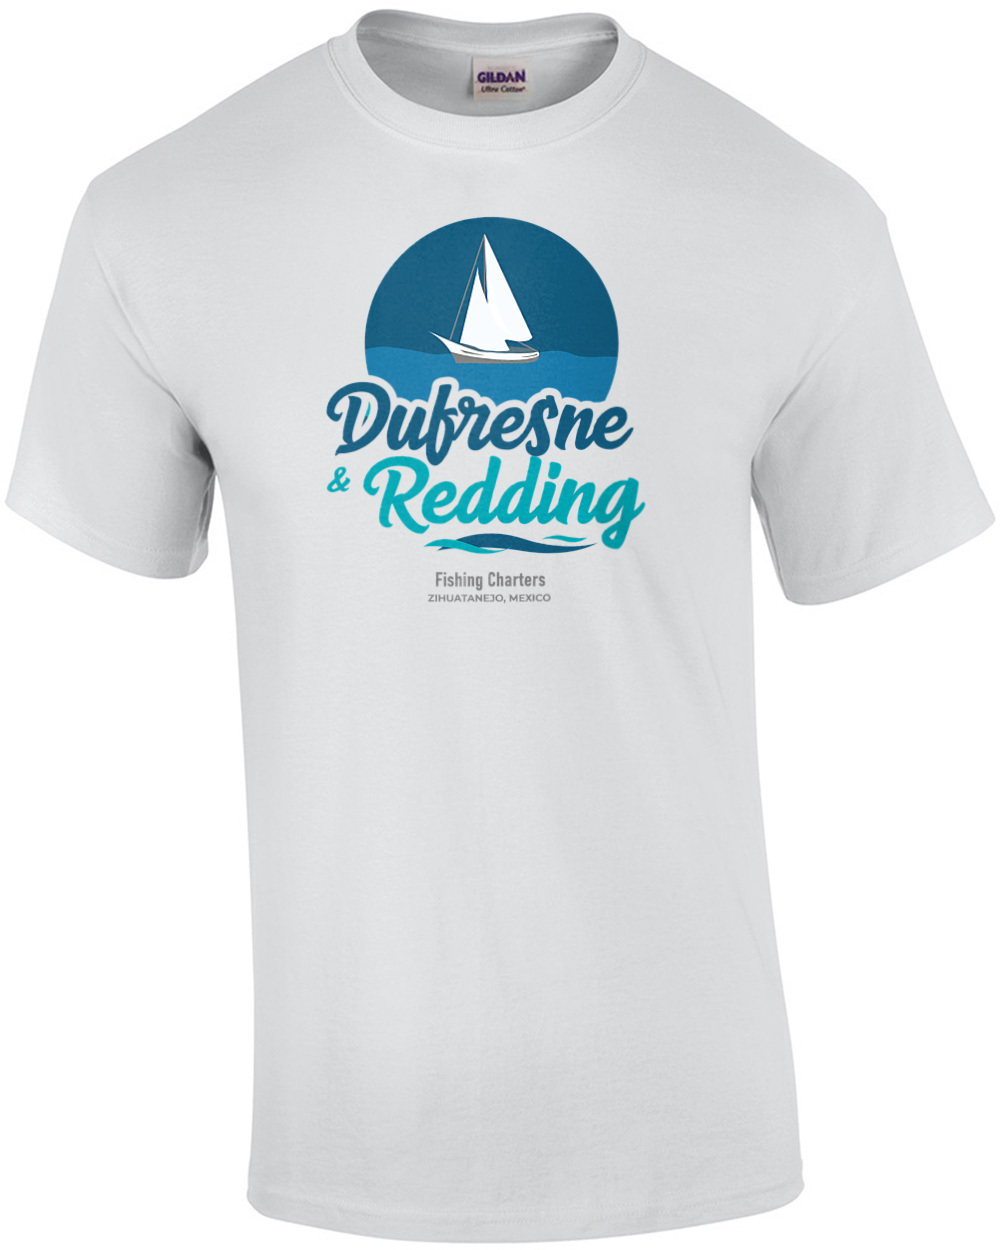 Dufresne & Redding Fishing Charters T-shirt inspired by The Shawshank Redemption 